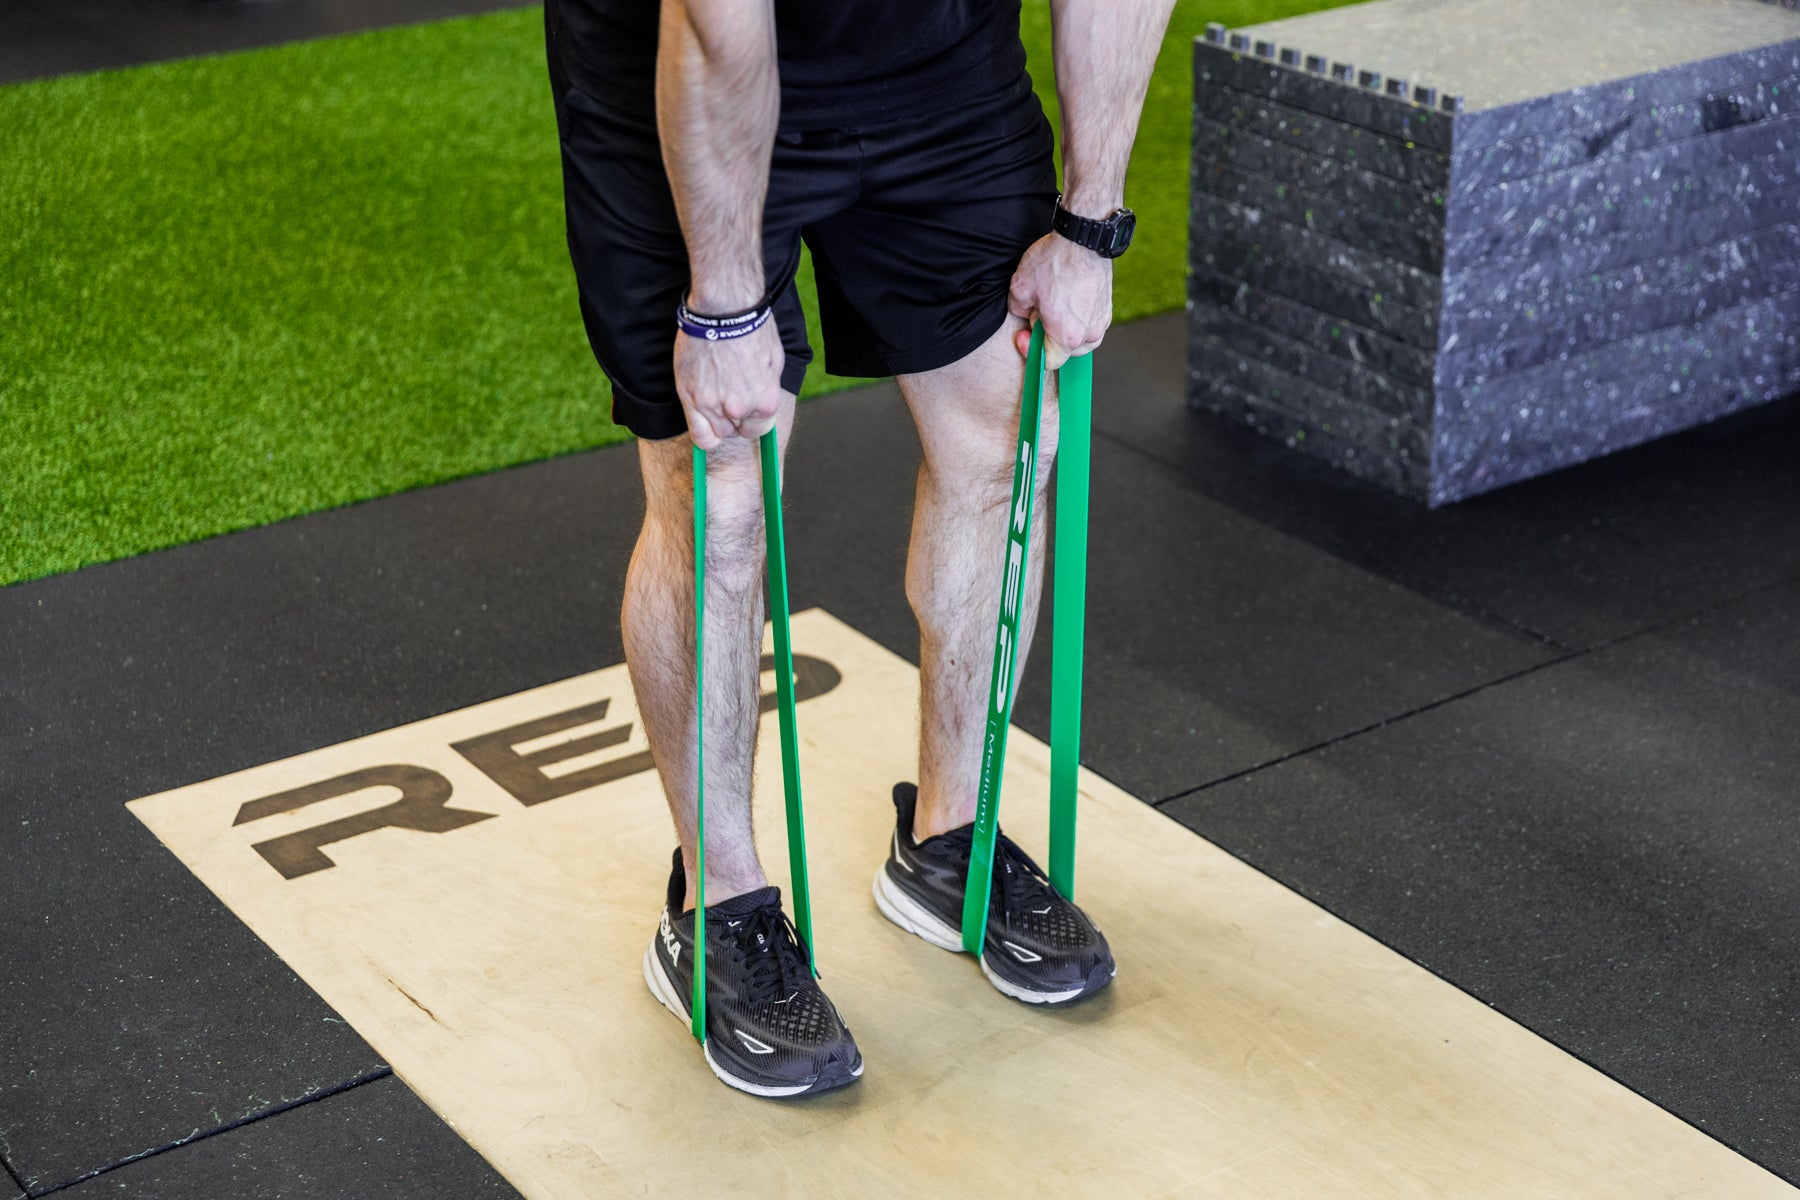 Lifter using green short resistance bands around his feet to perform banded deadlifts.